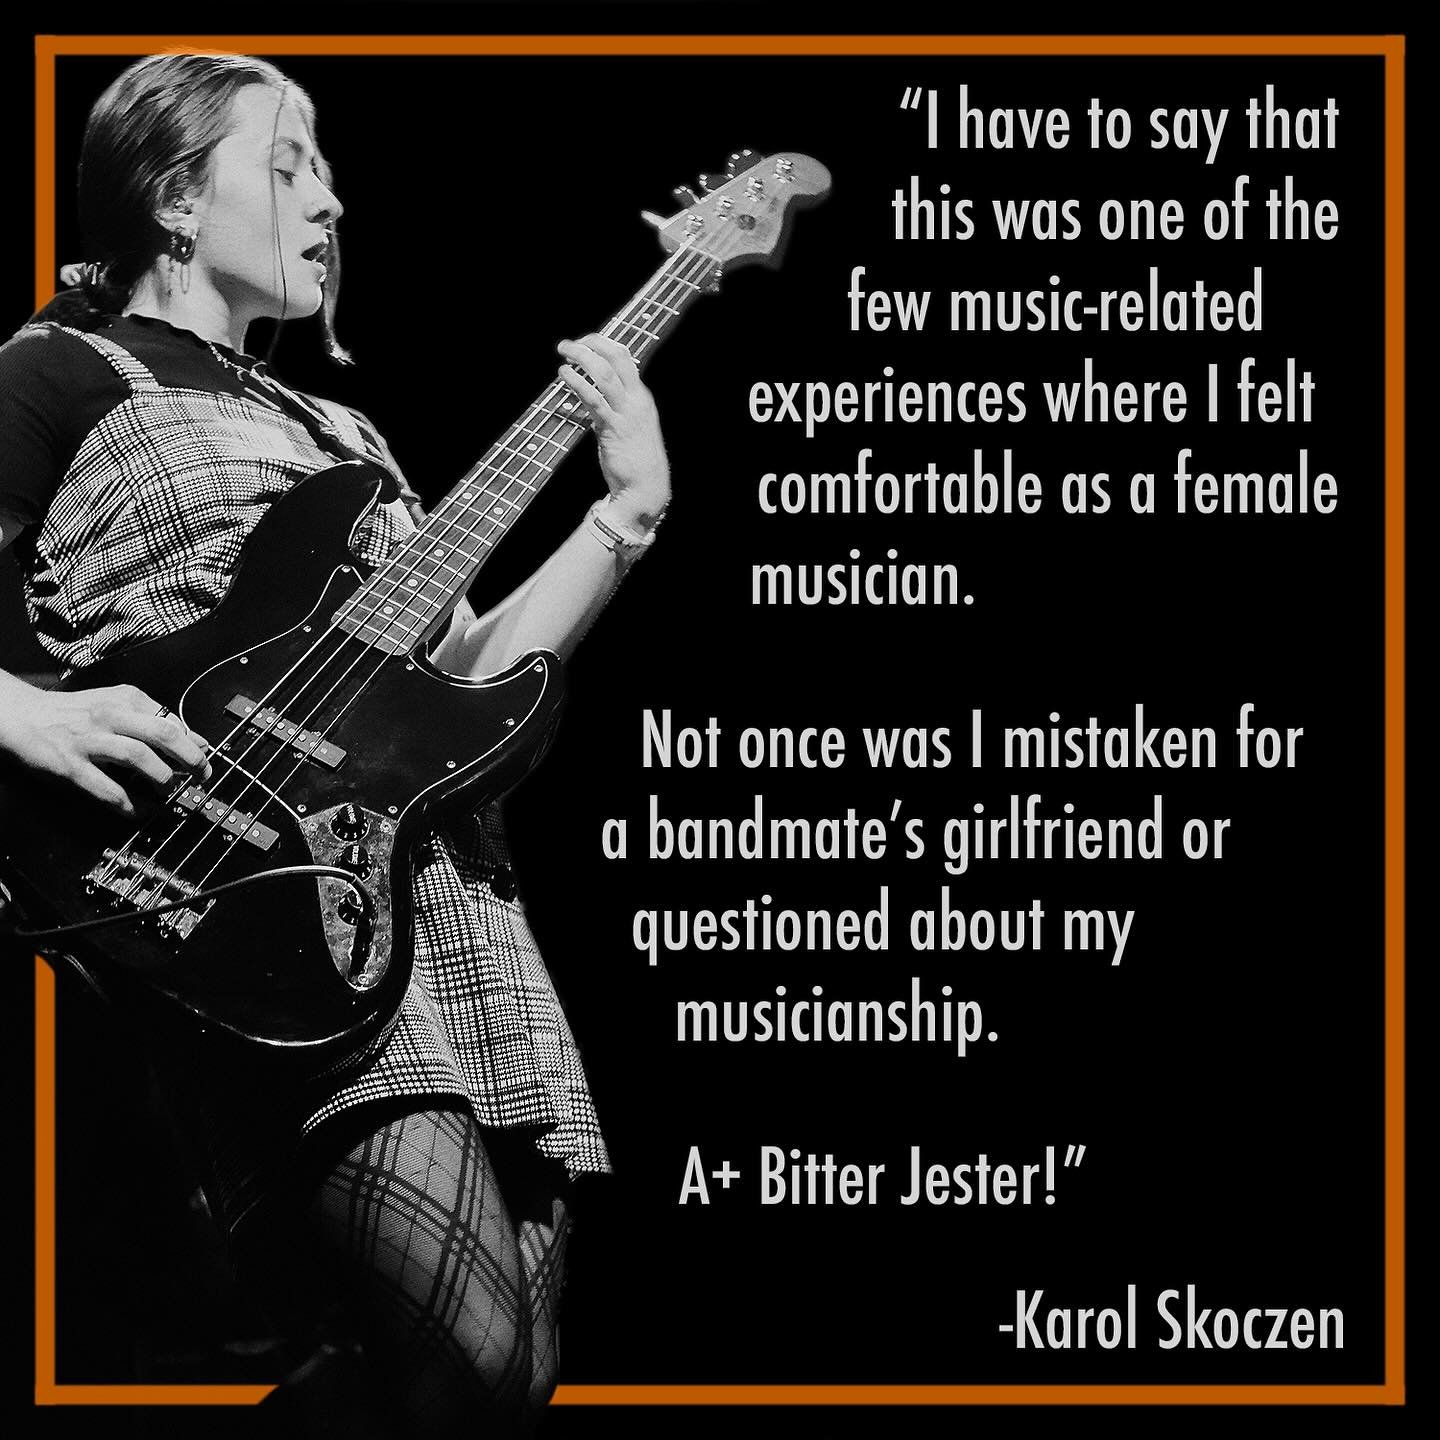 Bitter Jester Music Fest deadline in FOUR DAYS! Female musicians wanted - all styles of music welcome! Only requirement: at least half the members of a band must be 21 or younger to apply and solo artists are welcome (link in bio).

Karol is a former